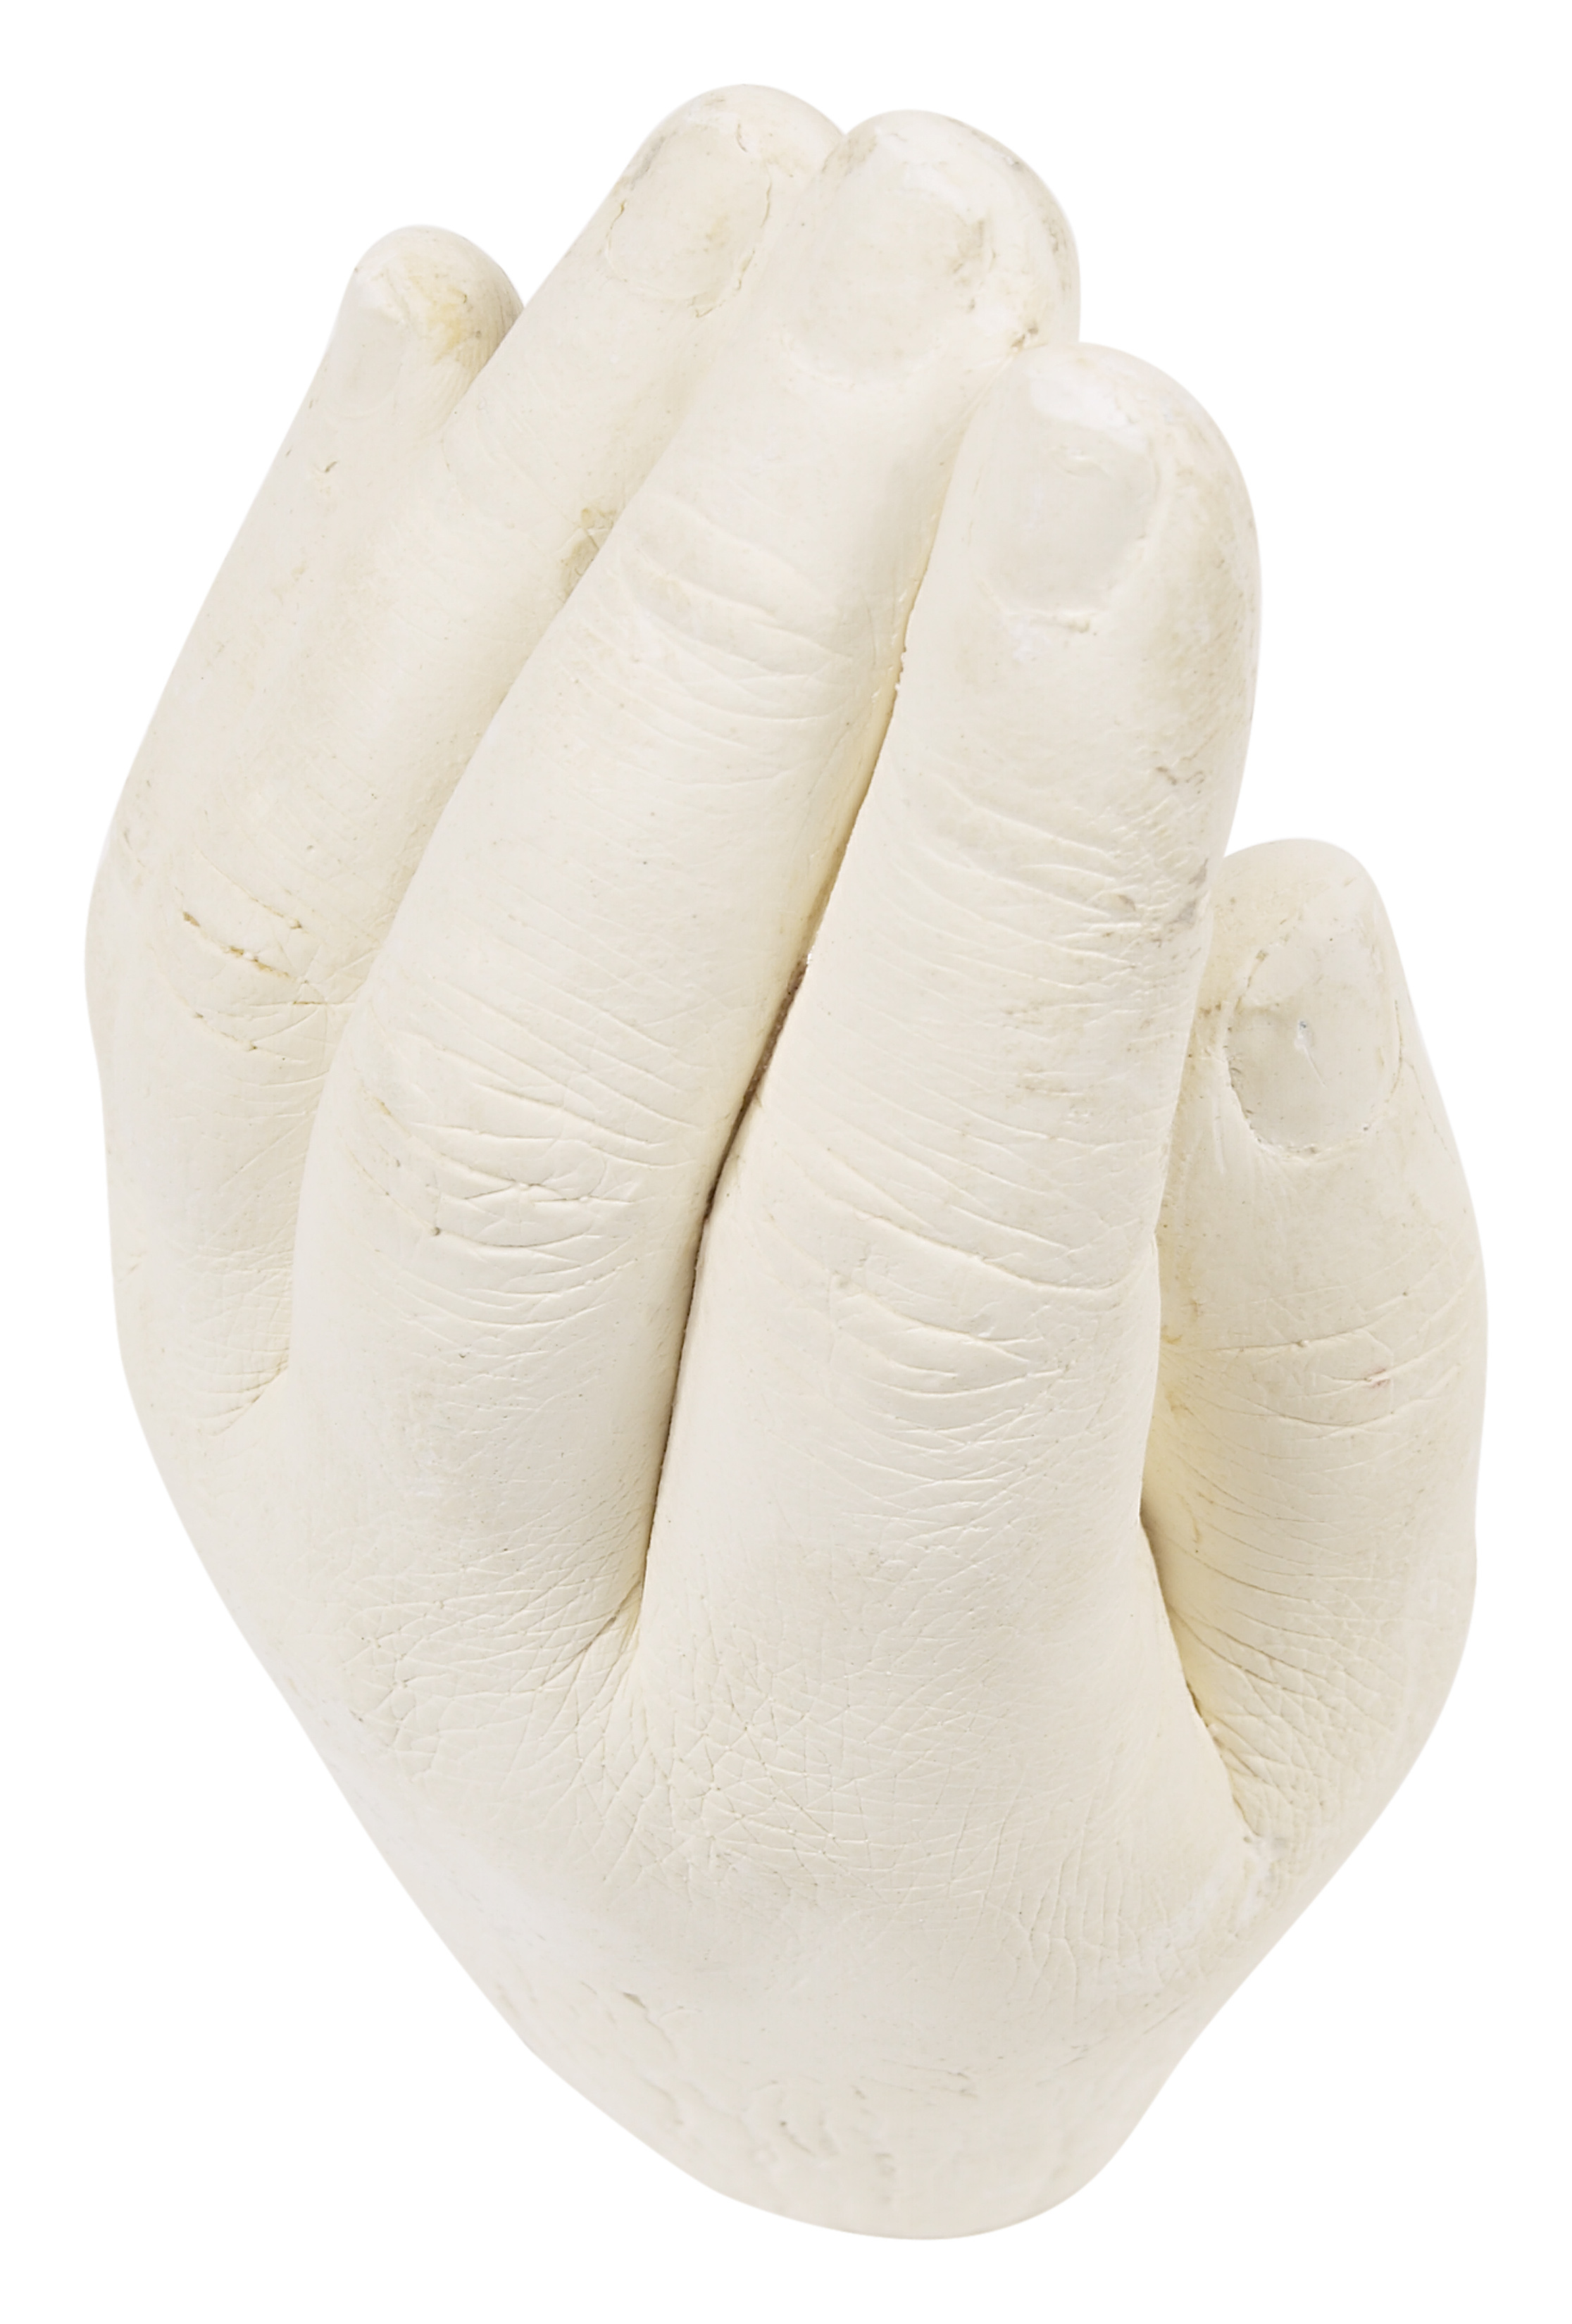 How to Harden a Plaster of Paris Cast